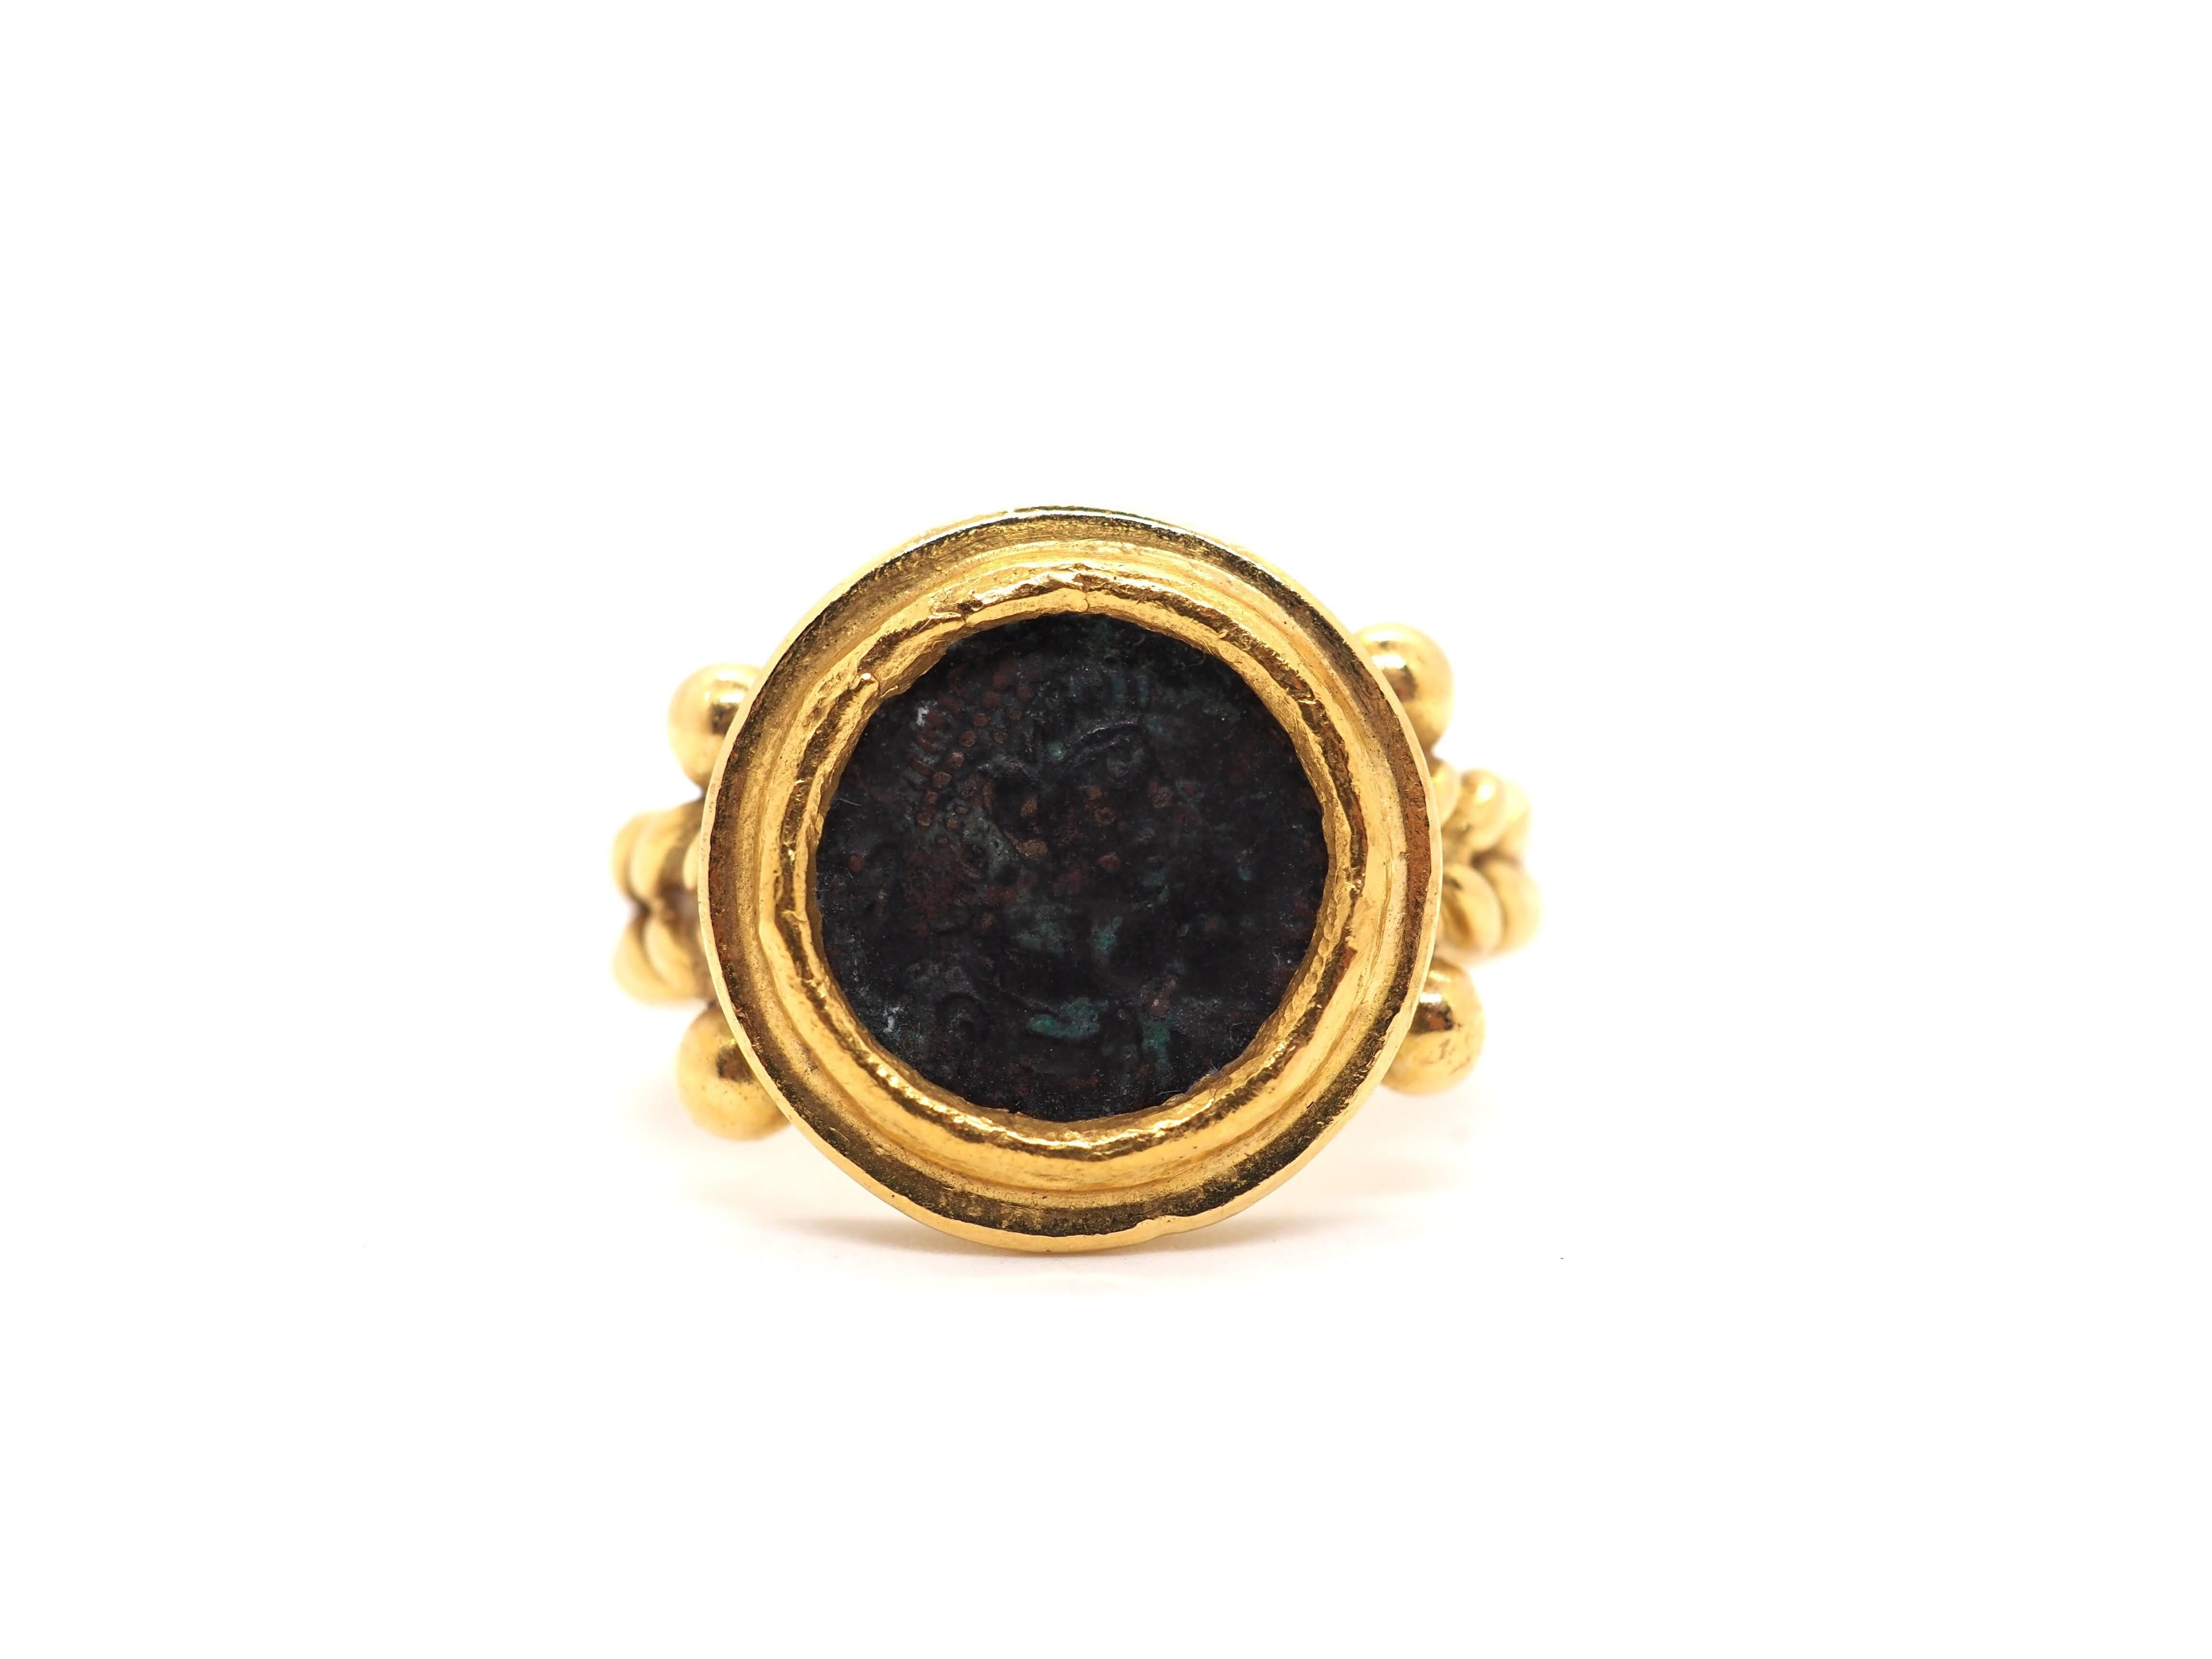 Rare 21K Gold Antique Ring with Alexander the Great Roman Coin - Unique Historic For Sale 1